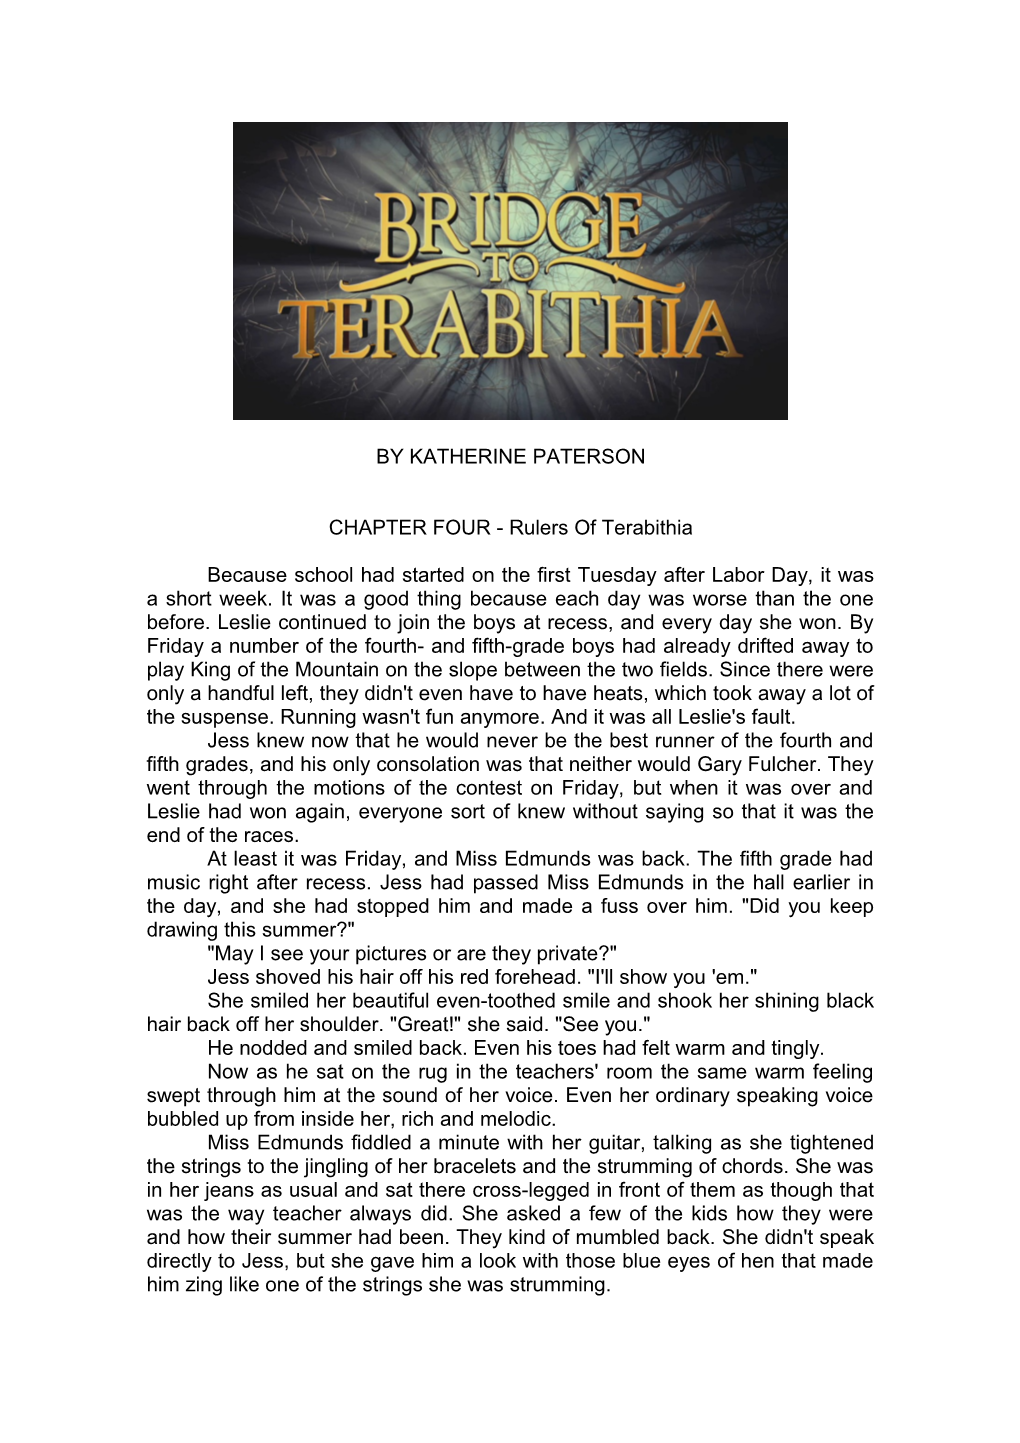 CHAPTER FOUR - Rulers of Terabithia